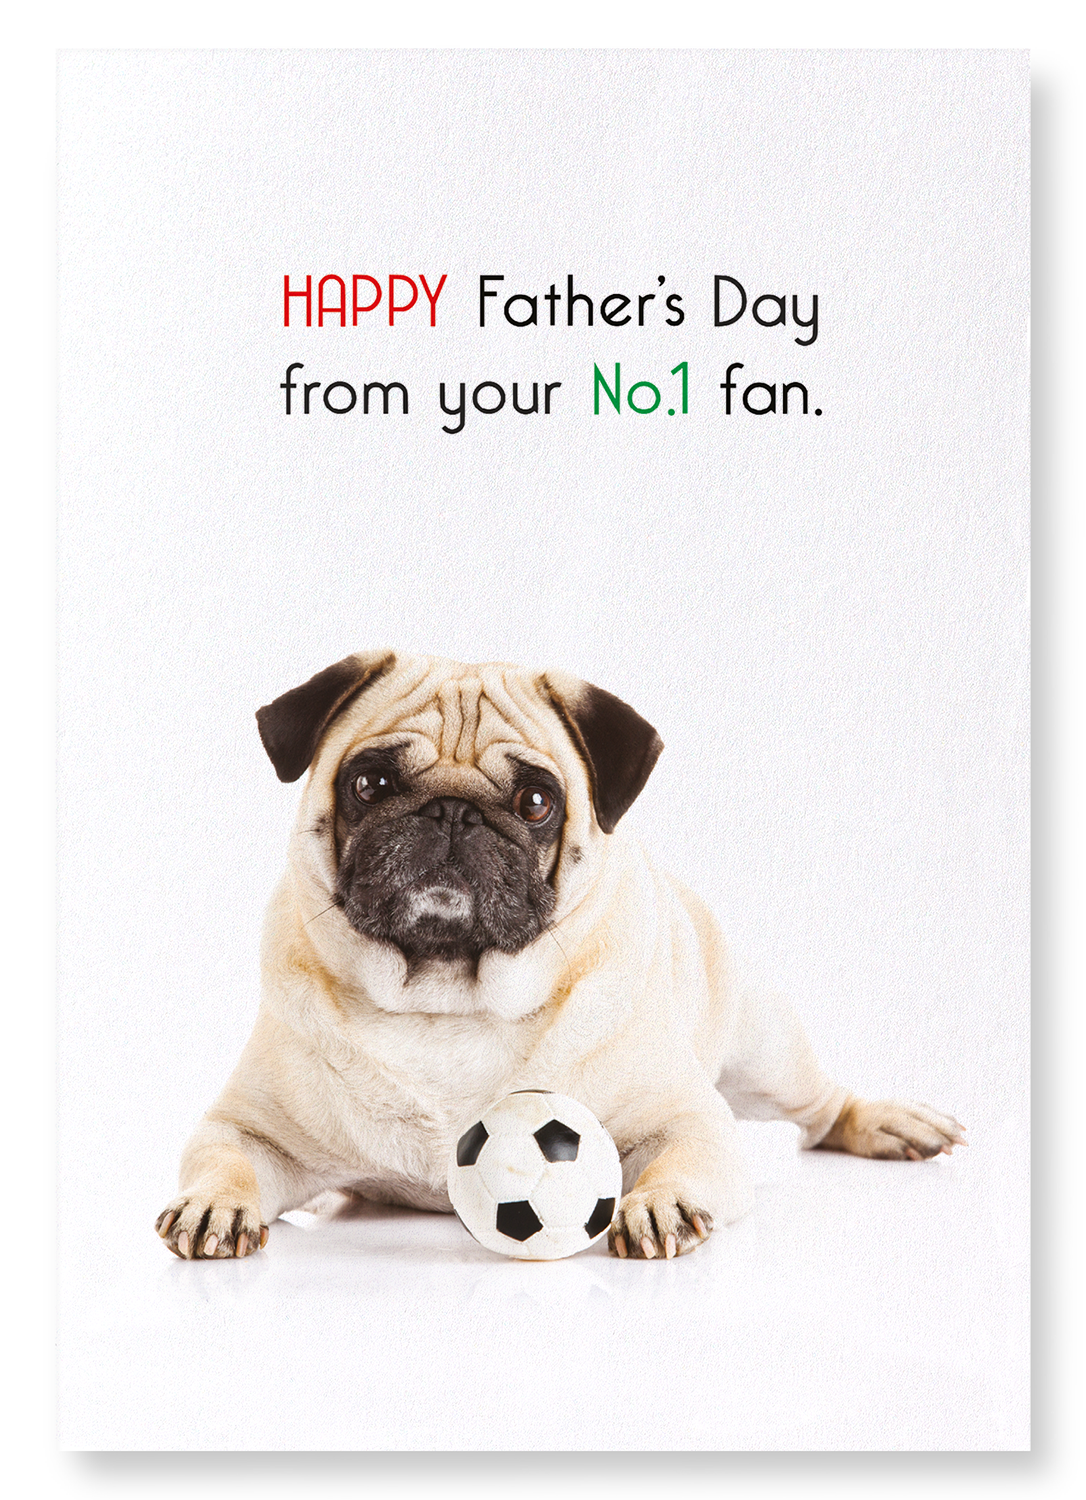 FATHER'S DAY NO.1 FAN: Funny Animal Art print